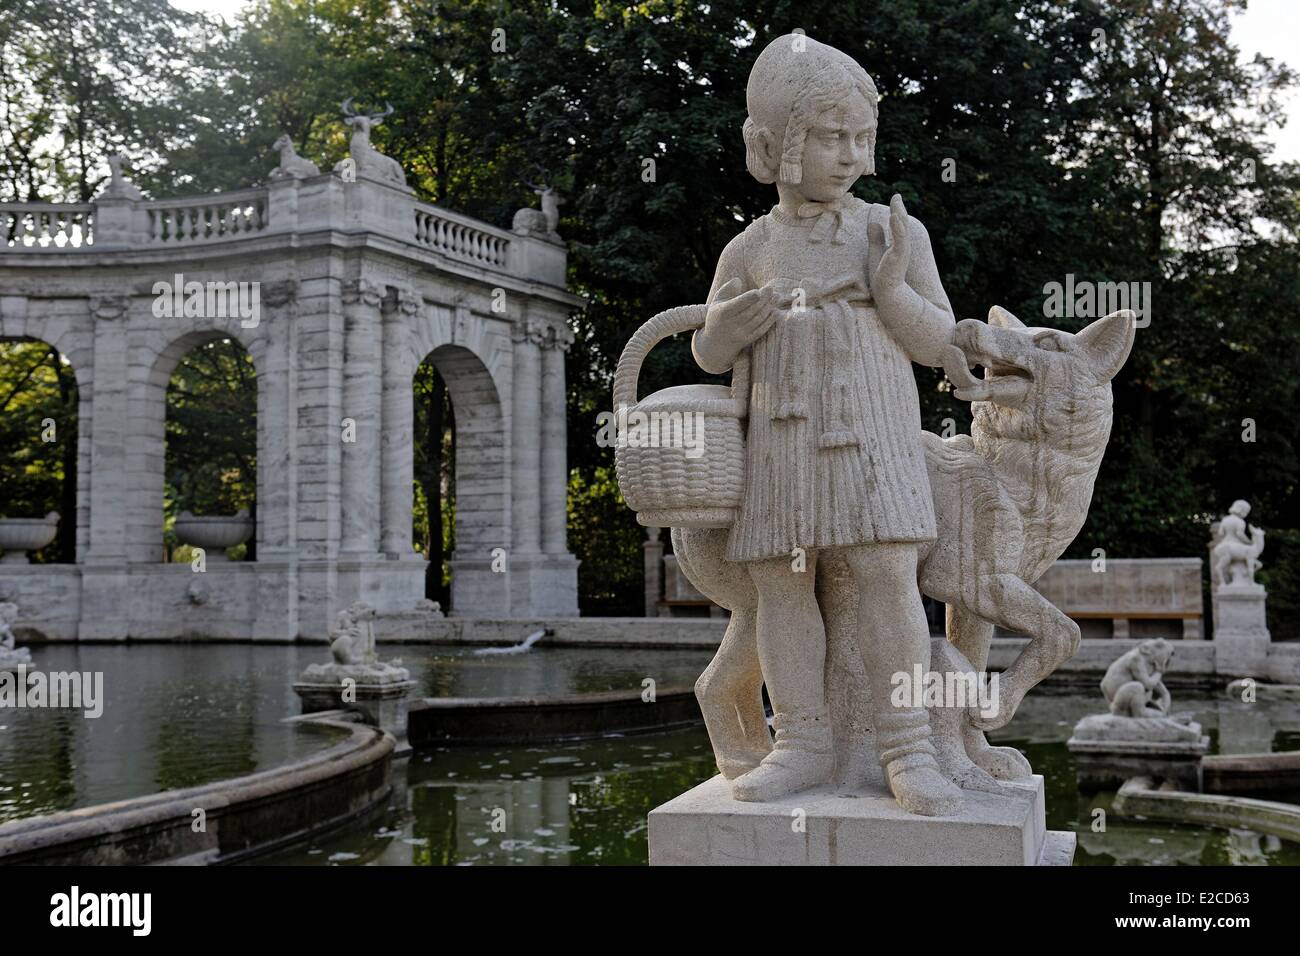 Germany, Berlin, fountain of the fairy tales (Märchenbrunnen), baroque fountain in Volkspark Friedrichshain, created in the early 20th by Ludwig Hoffmann, featuring characters inspired by the works of the Brothers Grimm Stock Photo